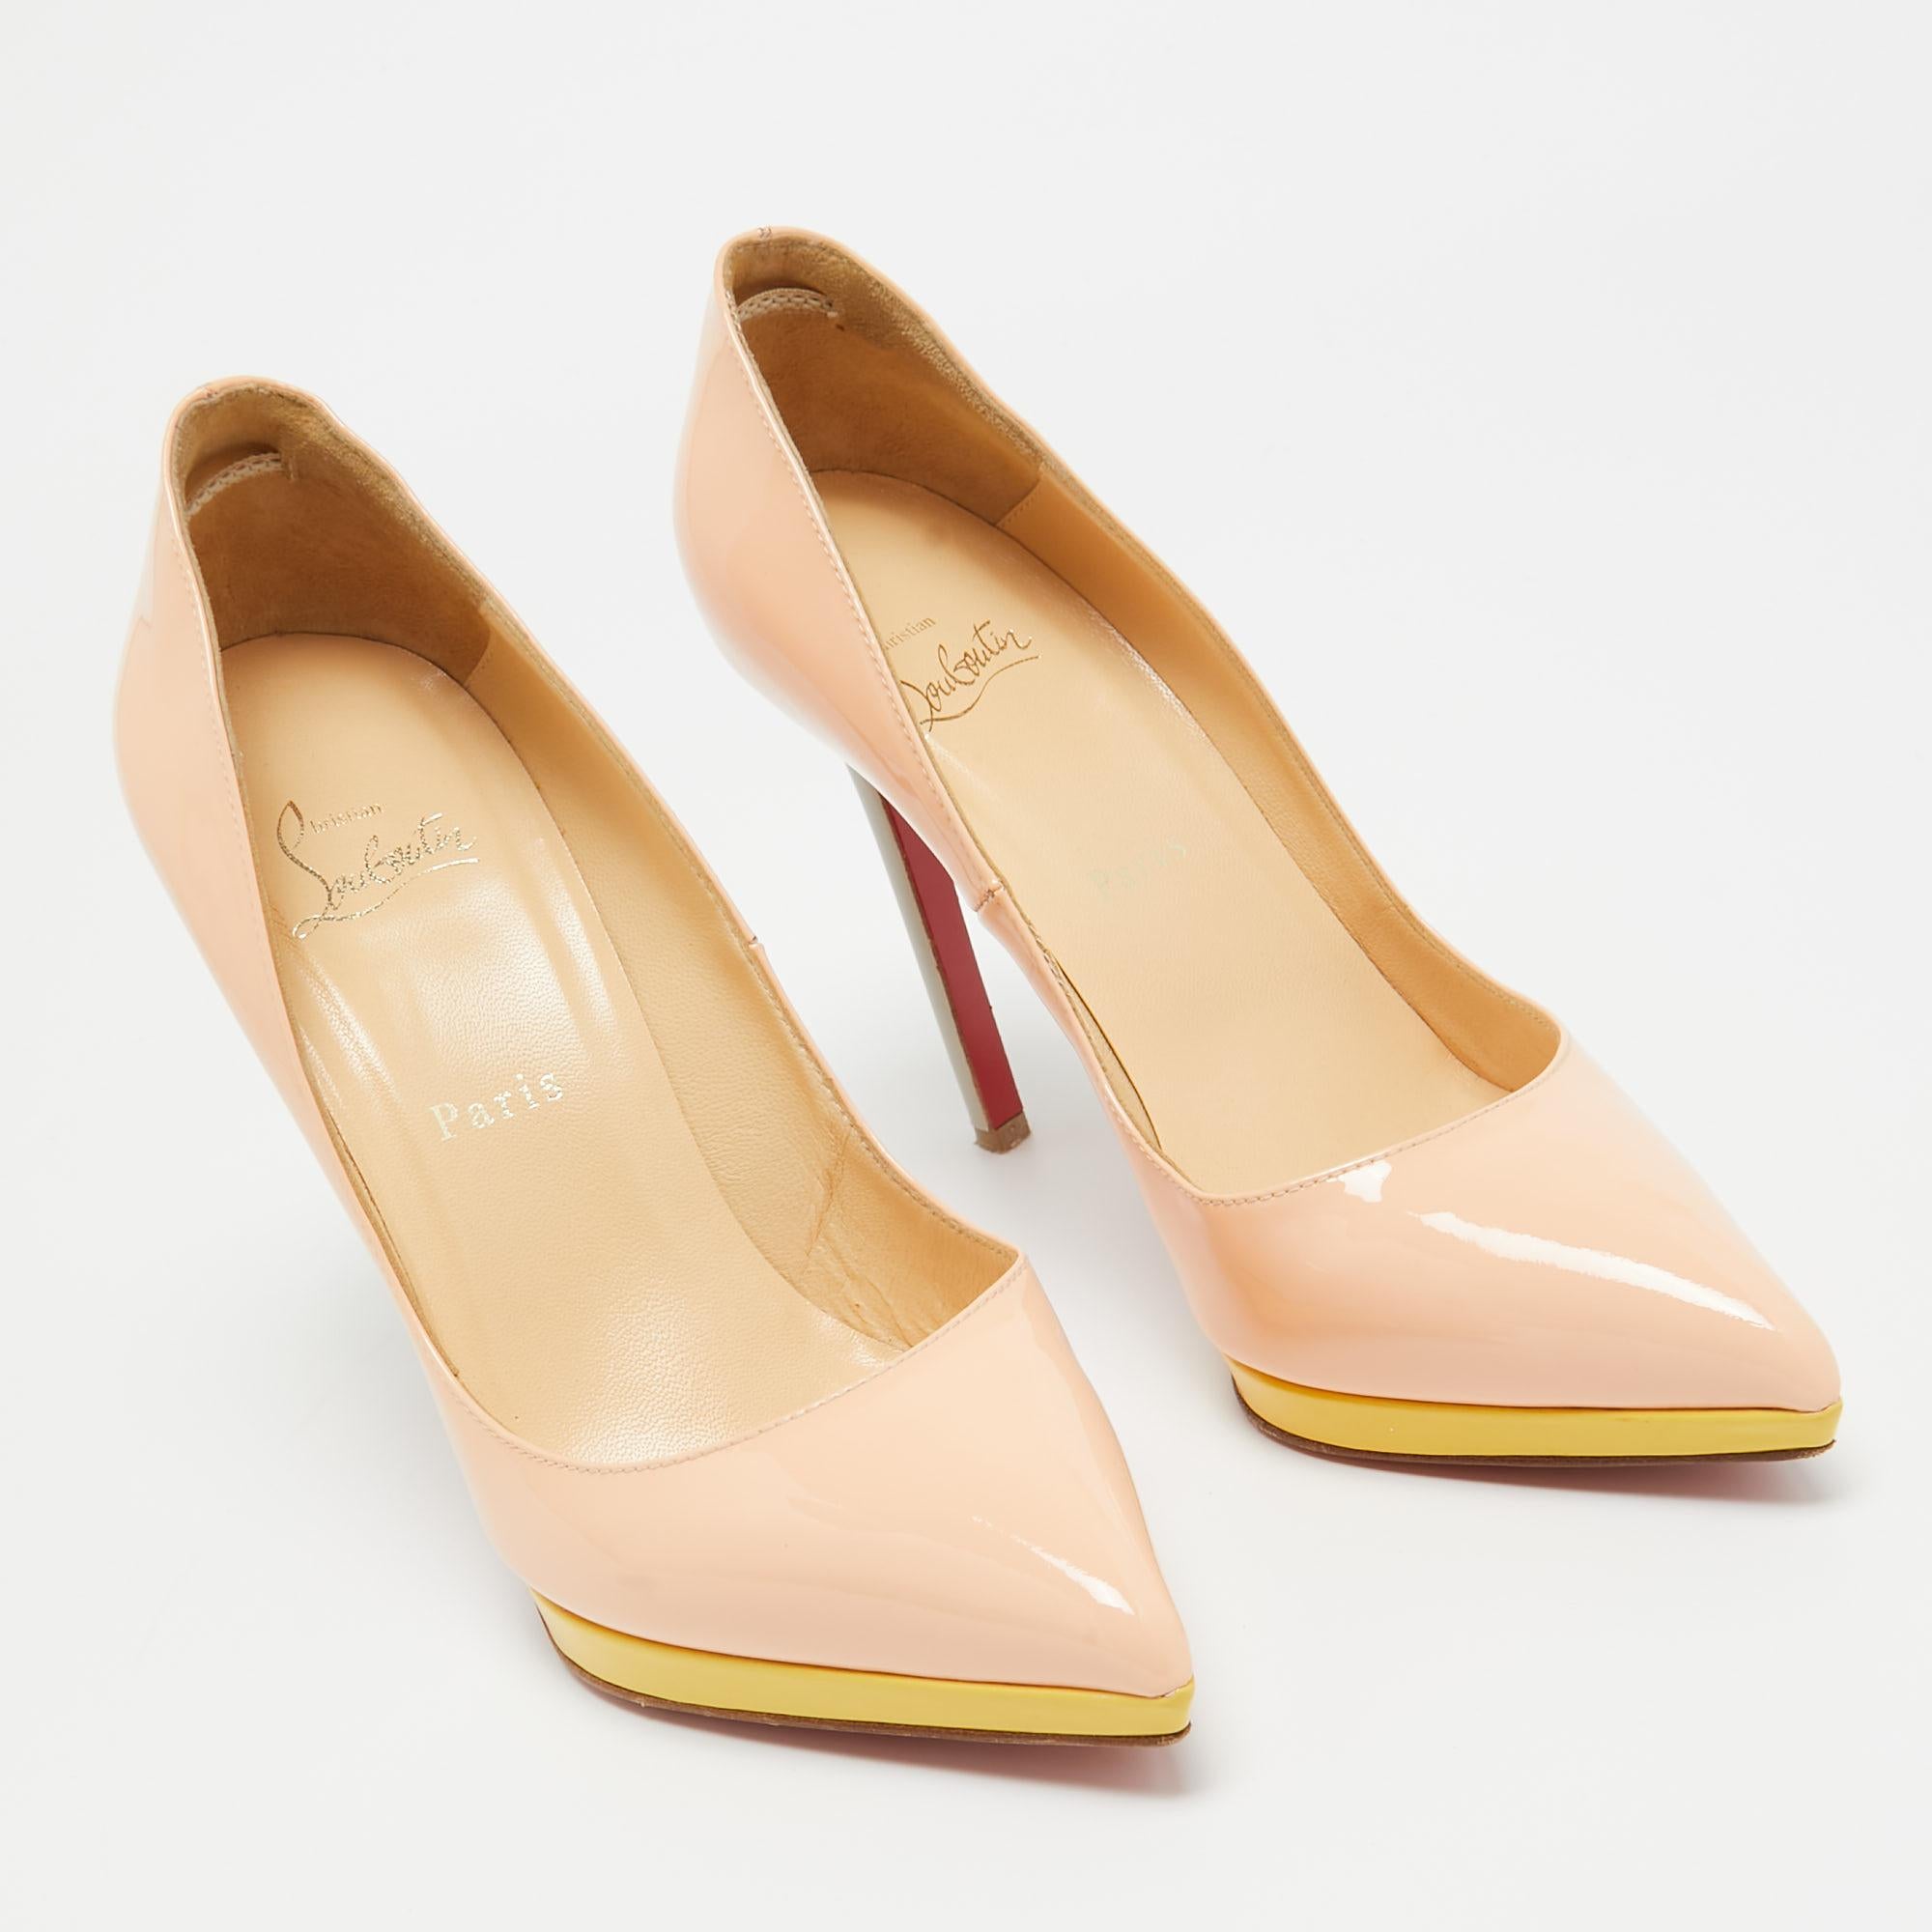 Christian Louboutin Peach Pink Patent Leather Pigalle Plato Pumps Size 38.5 For Sale 1